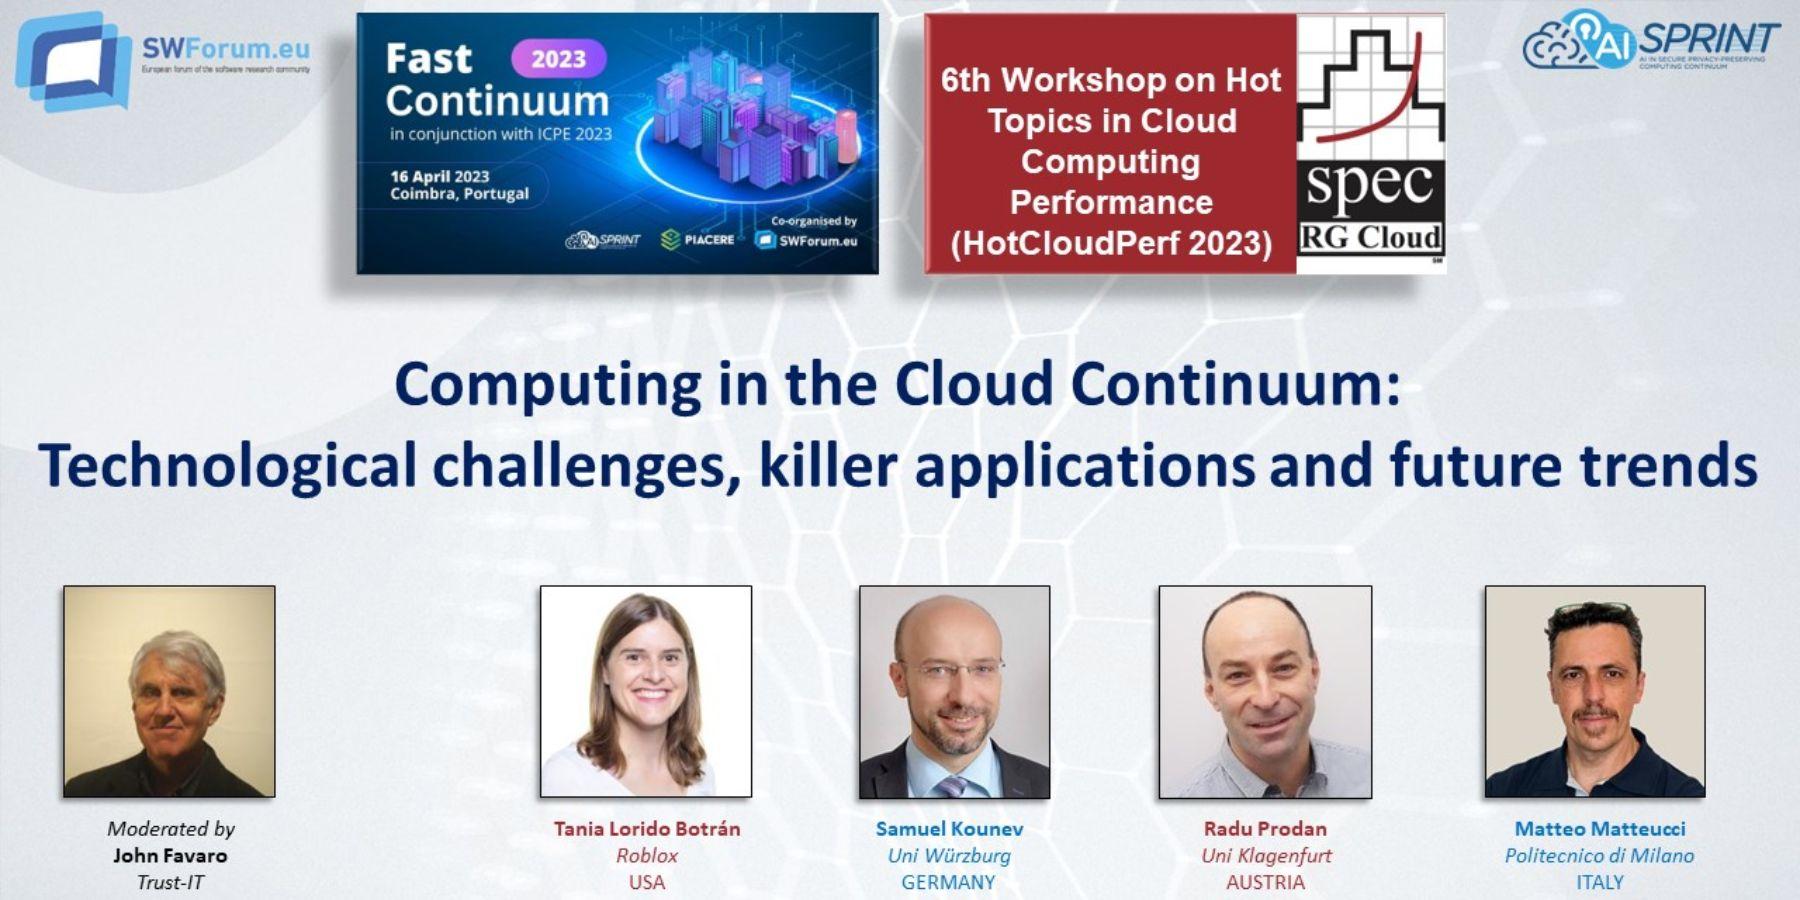 Computing in the Cloud Continuum: Technological challenges, killer applications and future trends